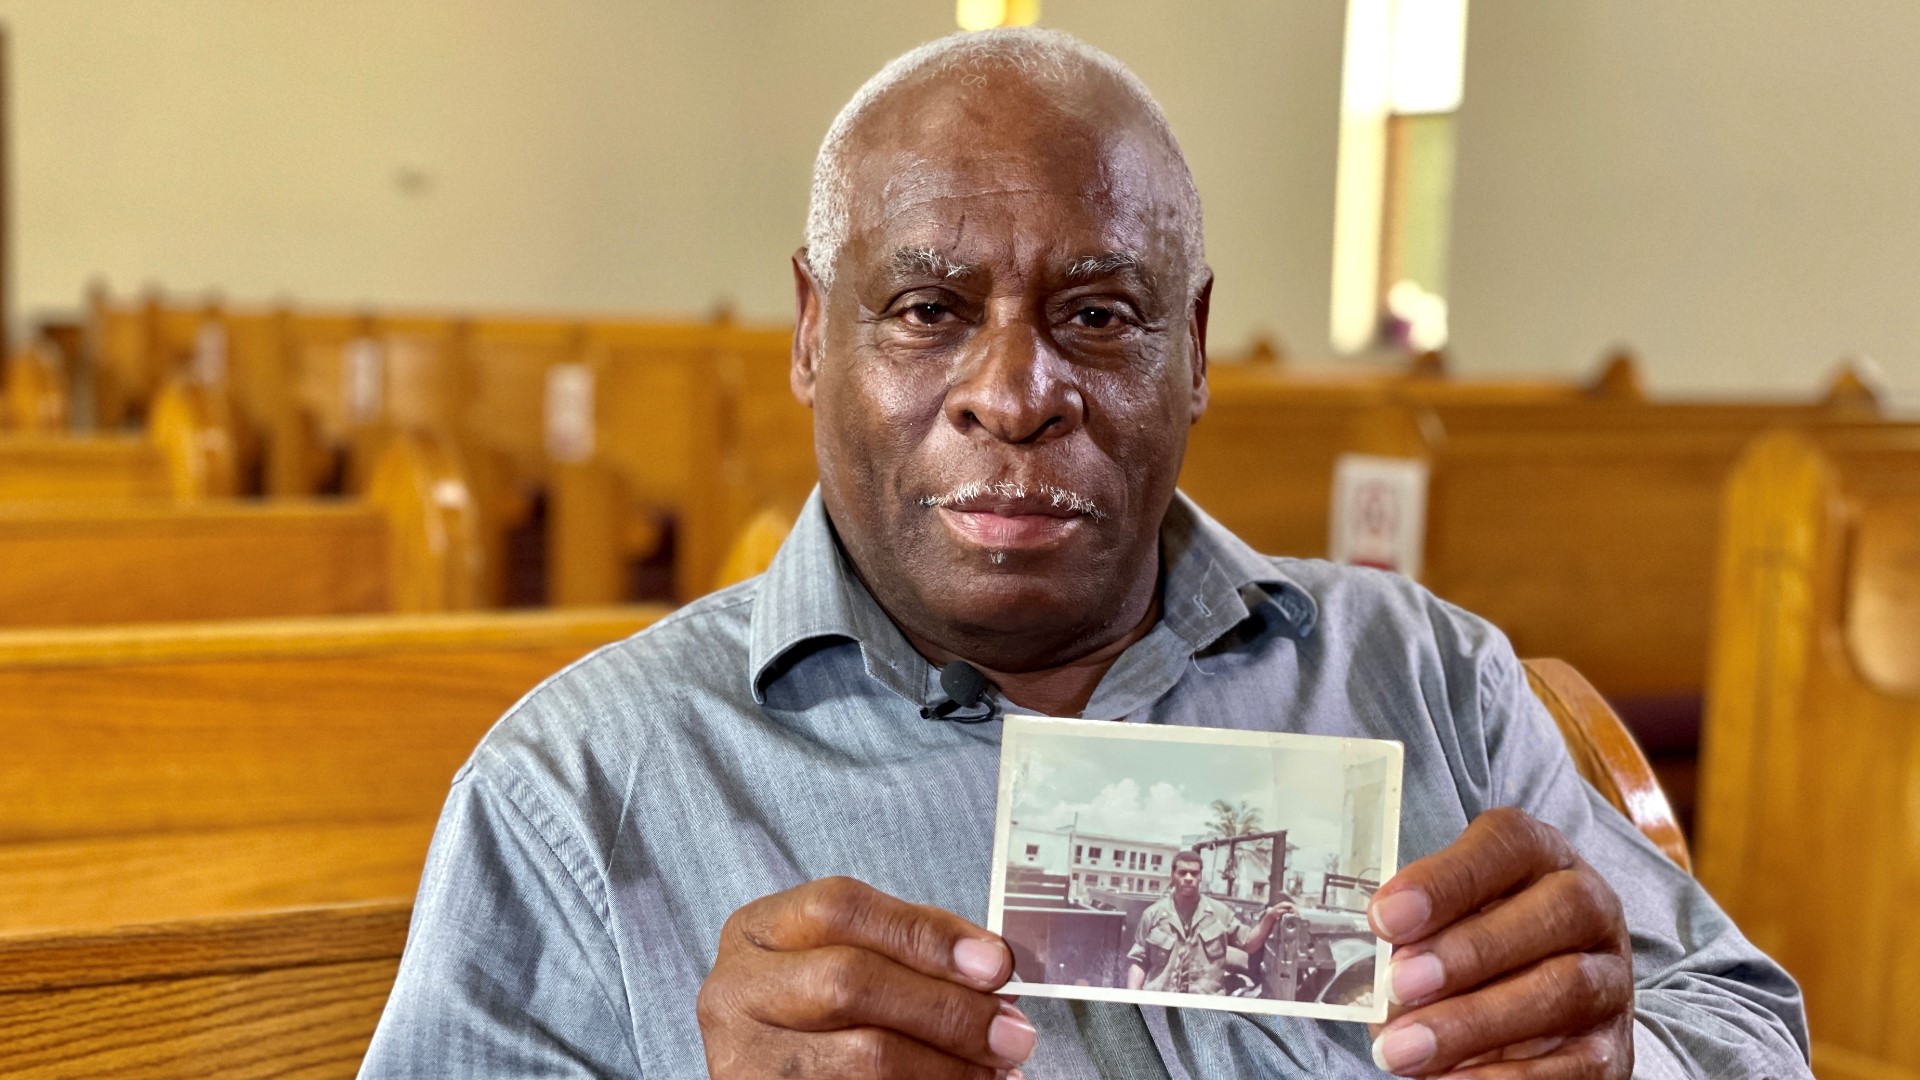 “They came to my rescue," said Vietnam veteran Melvin Oggs about the legal and emotional support he received from fellow veterans through Vet to Vet Tennessee.